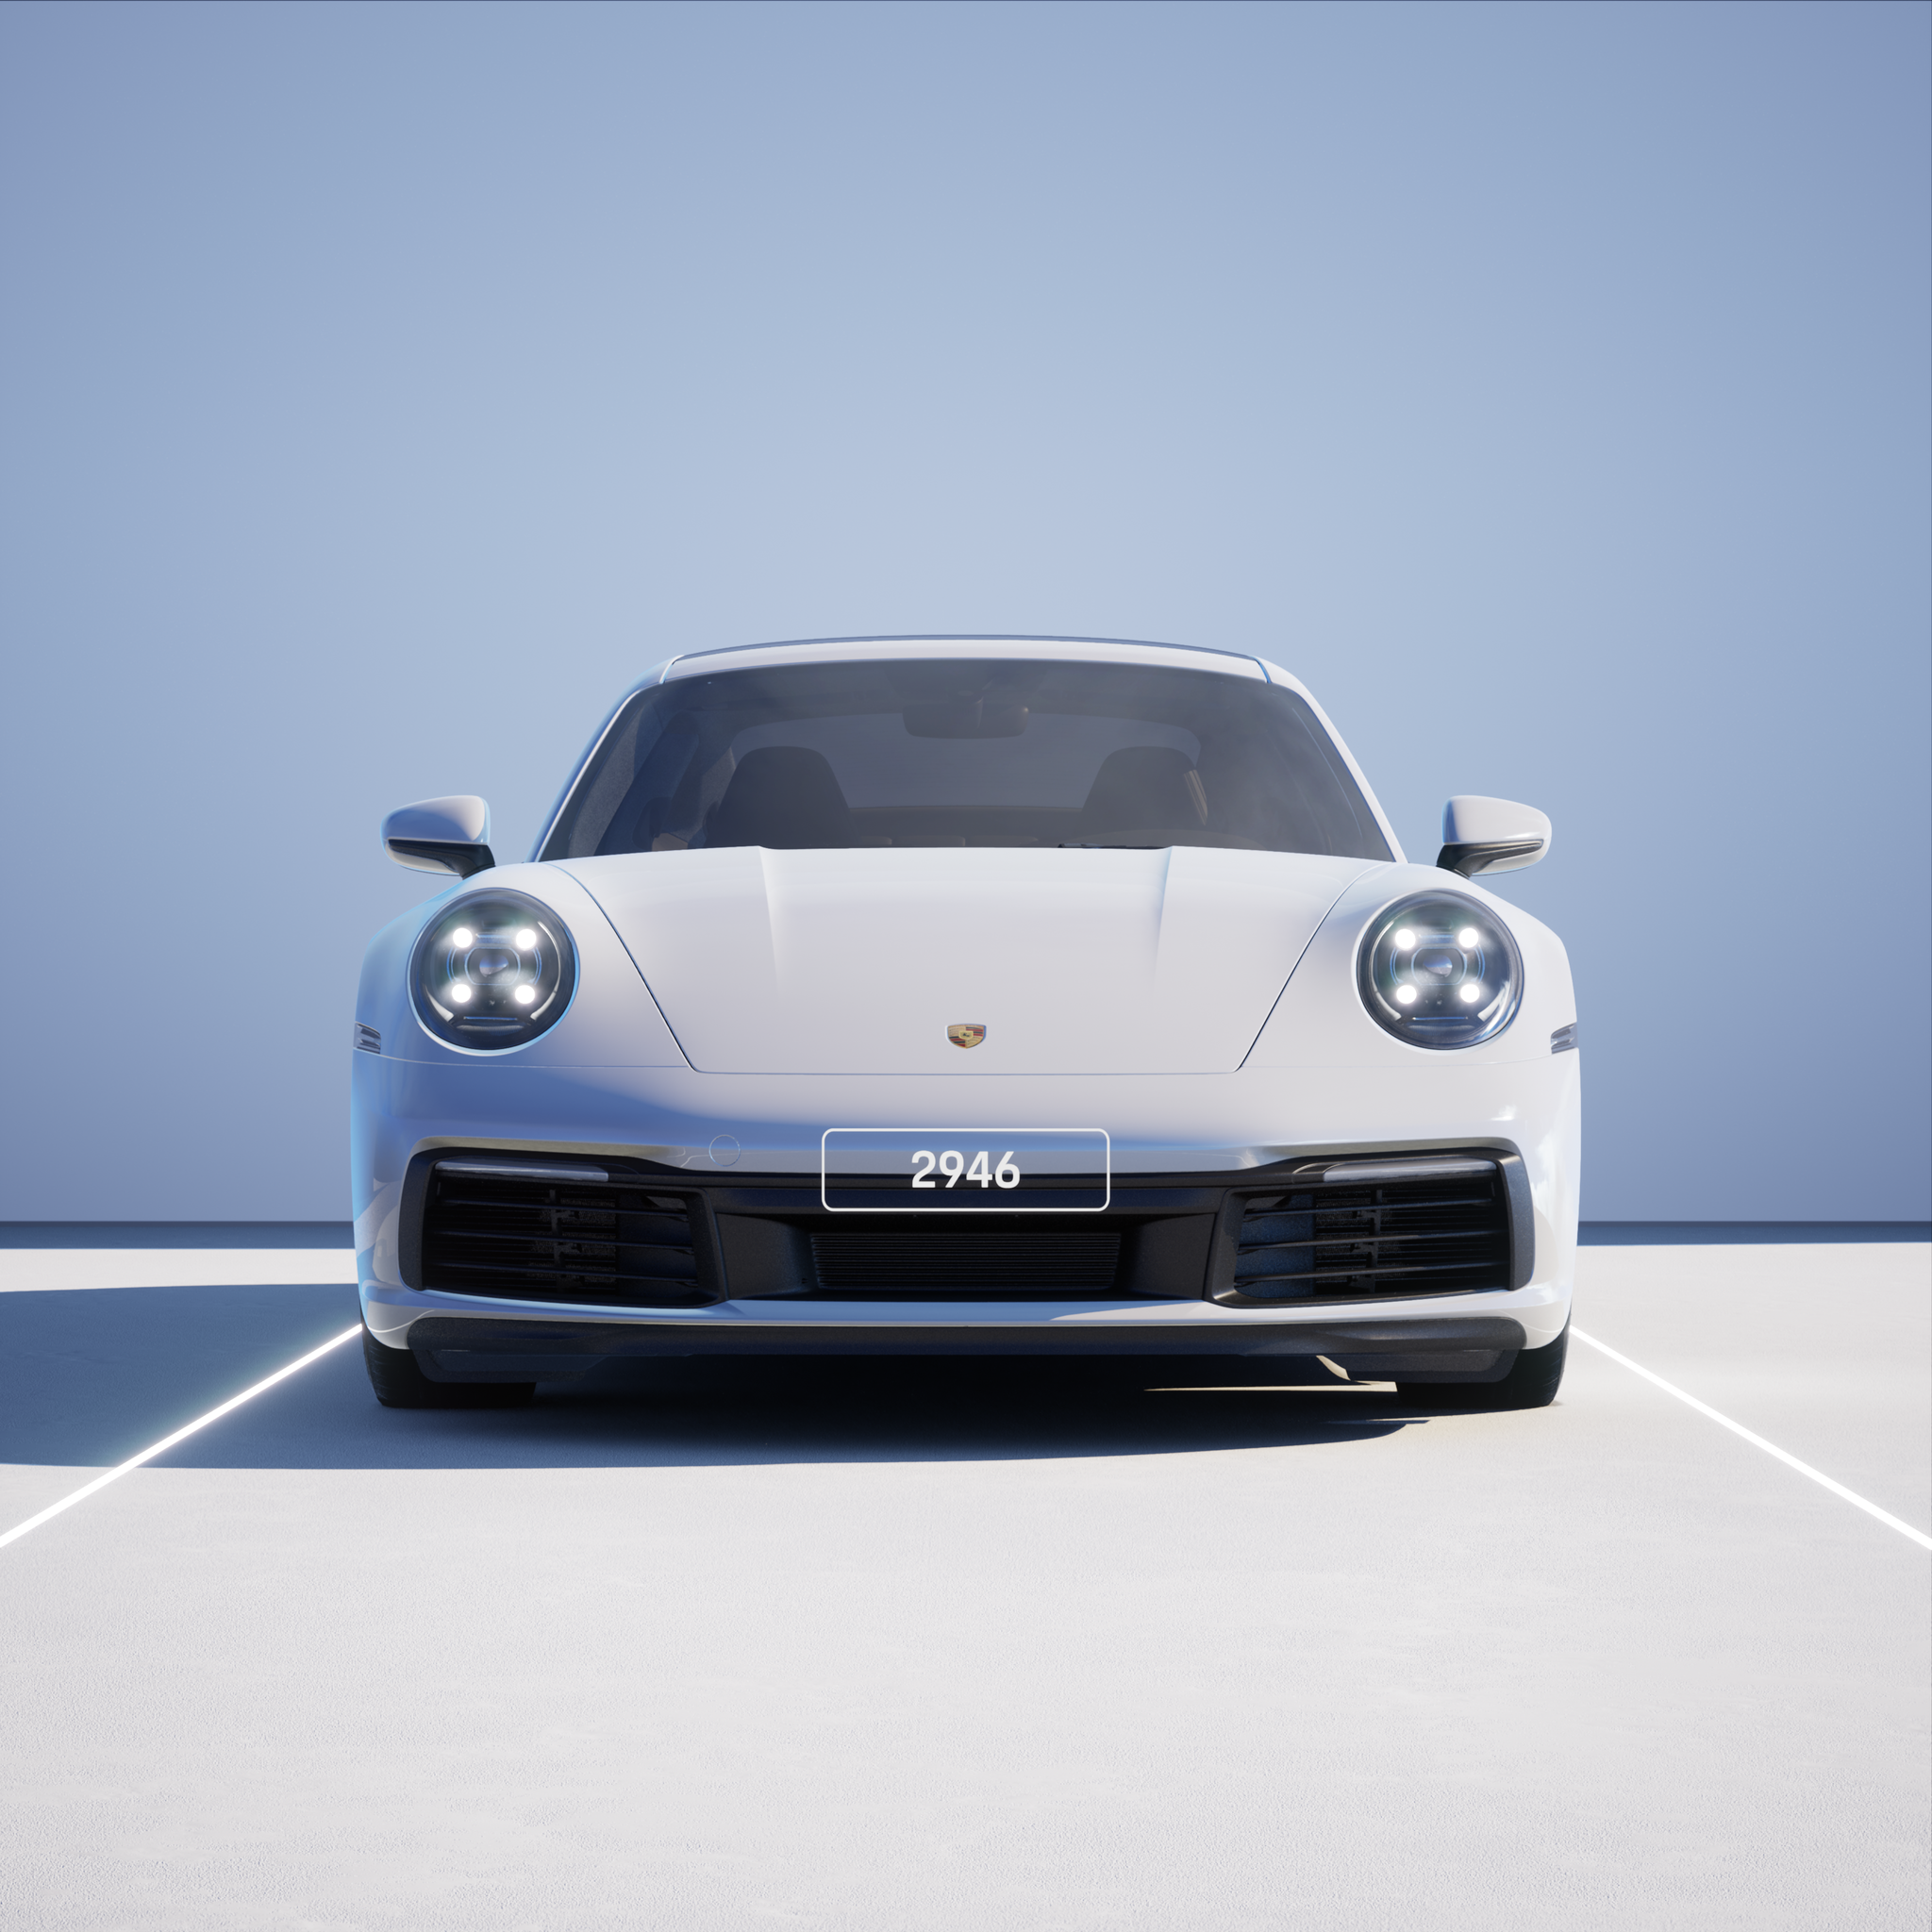 The PORSCHΞ 911 2946 image in phase